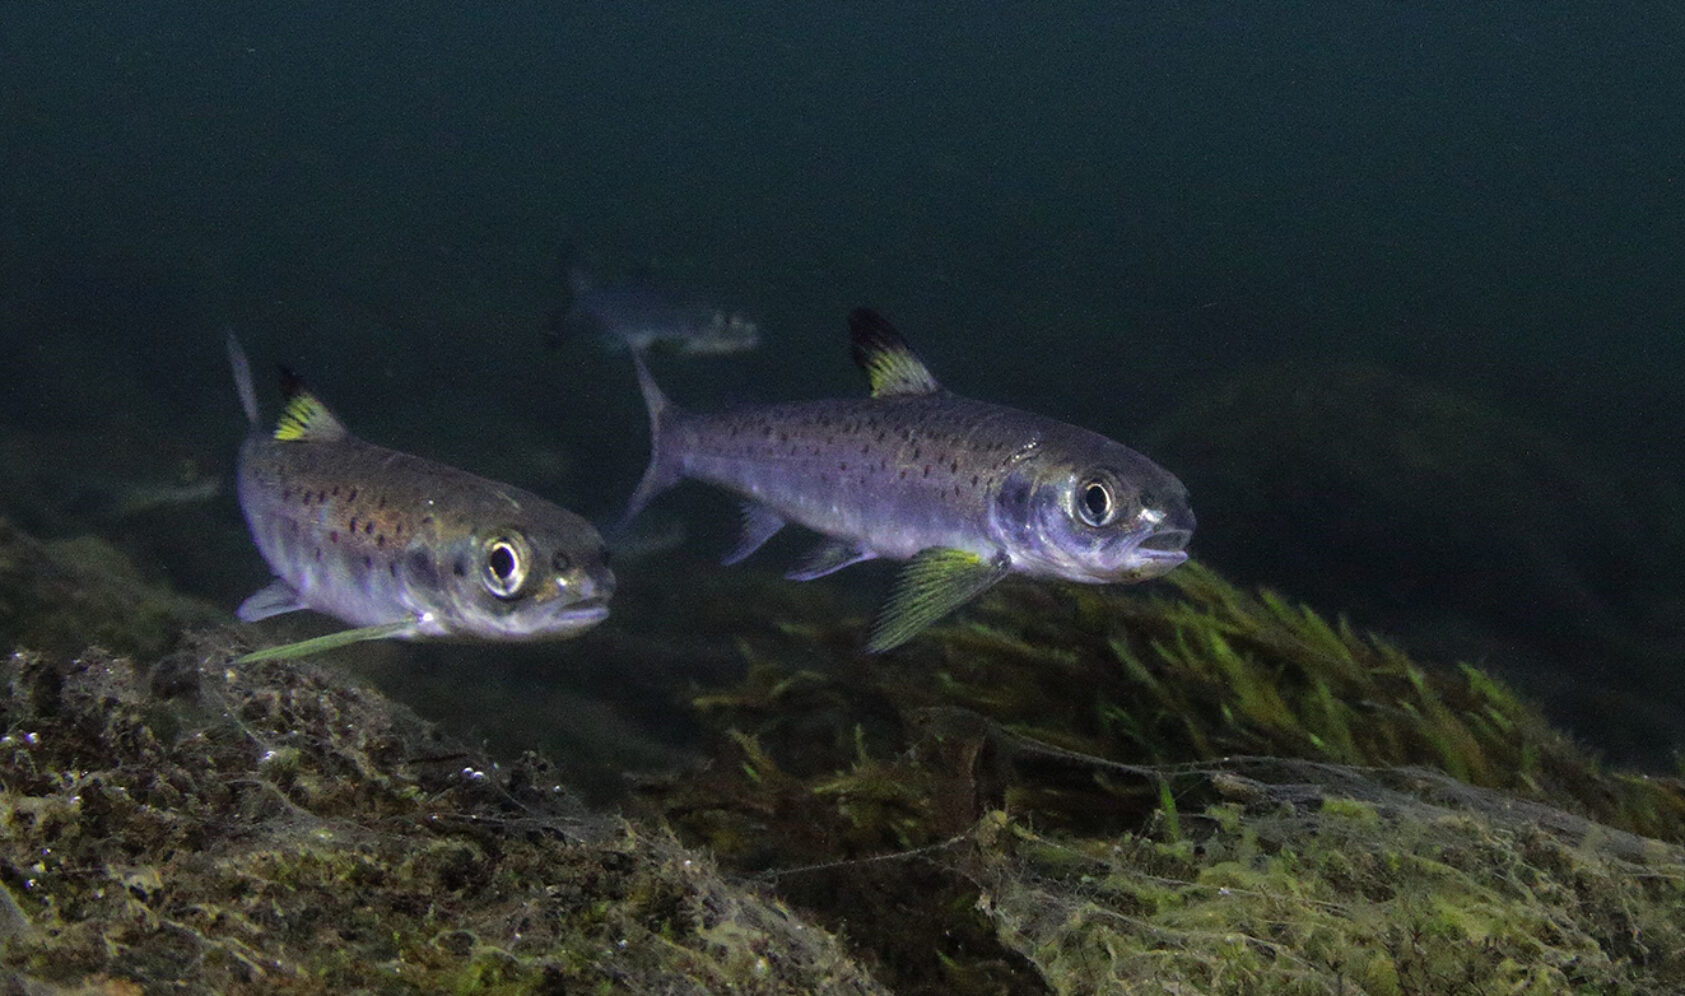 Bjørn Barlaup, NORCE LFI, Salmon smolt starting the long and hazardous migration from the river to the feeding grounds at sea., Smolt ut av elv web, <p>Bjørn Barlaup, NORCE LFI</p>, Two small fish swim side by side